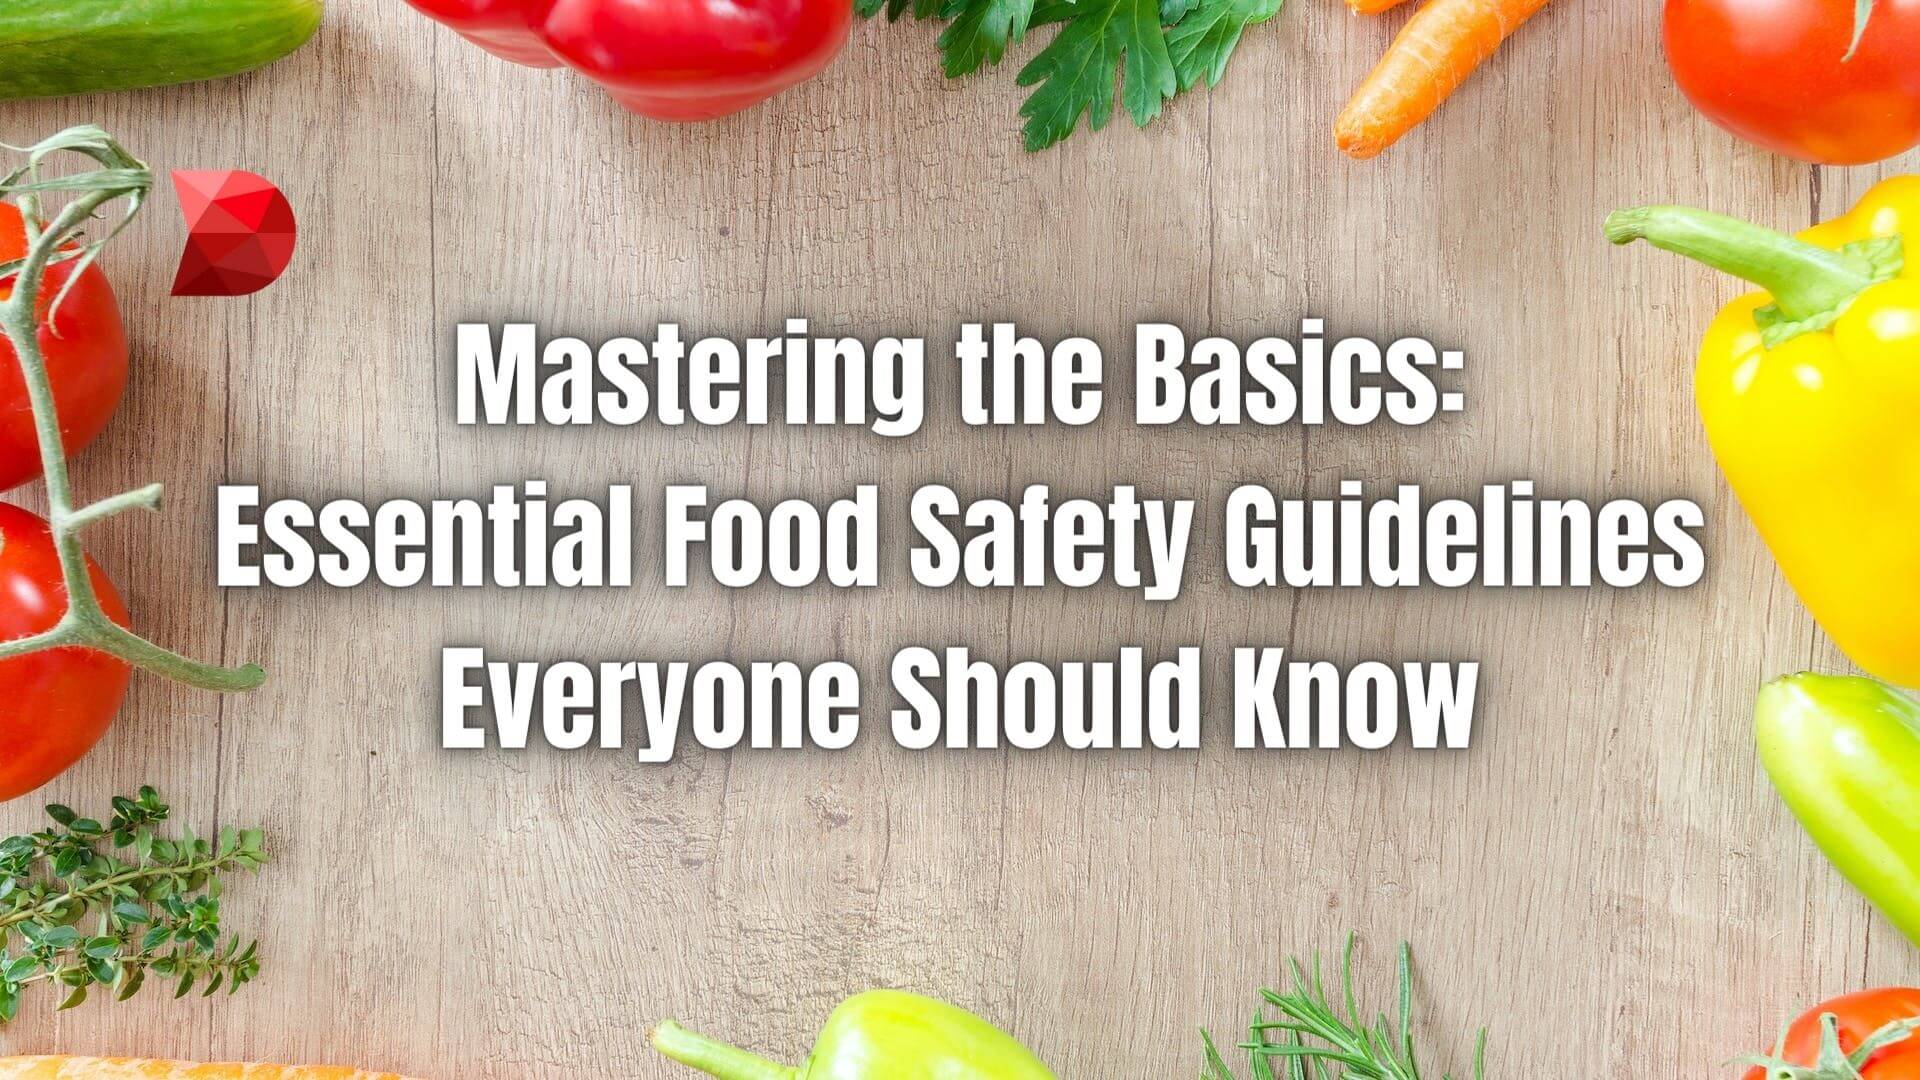 Master food safety guidelines with this comprehensive guide! Click here to learn vital guidelines for a safer, healthier dining experience.